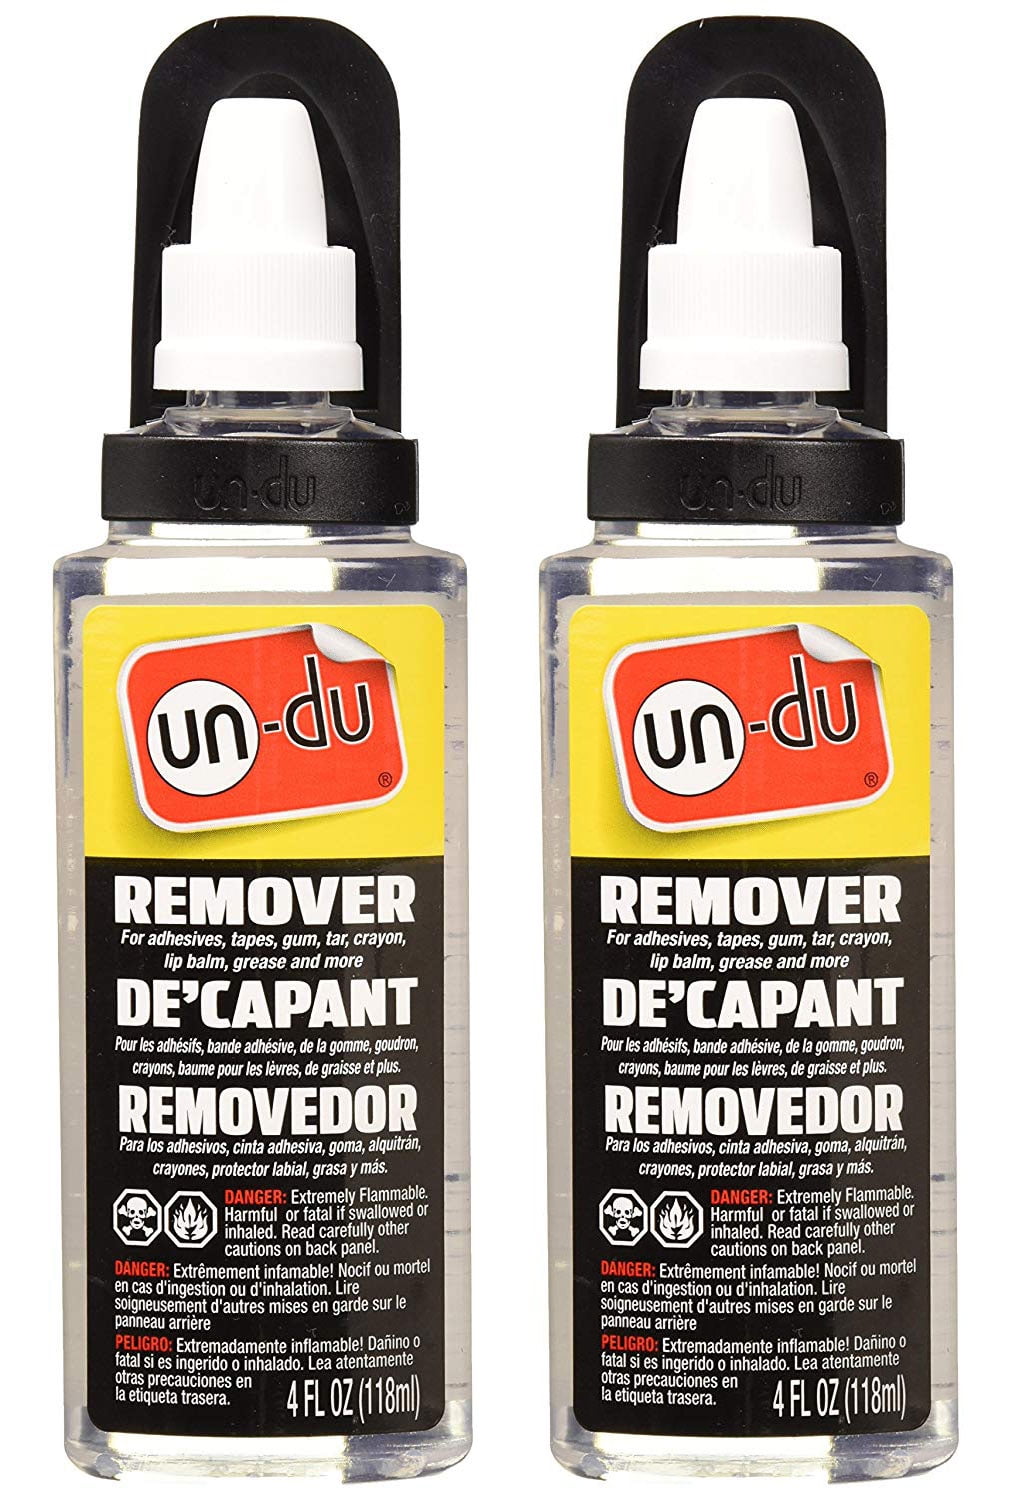 un-du Original Formula Sticker, Tape and Label Remover (Cannot Be Sold in  California) - 4 Ounce